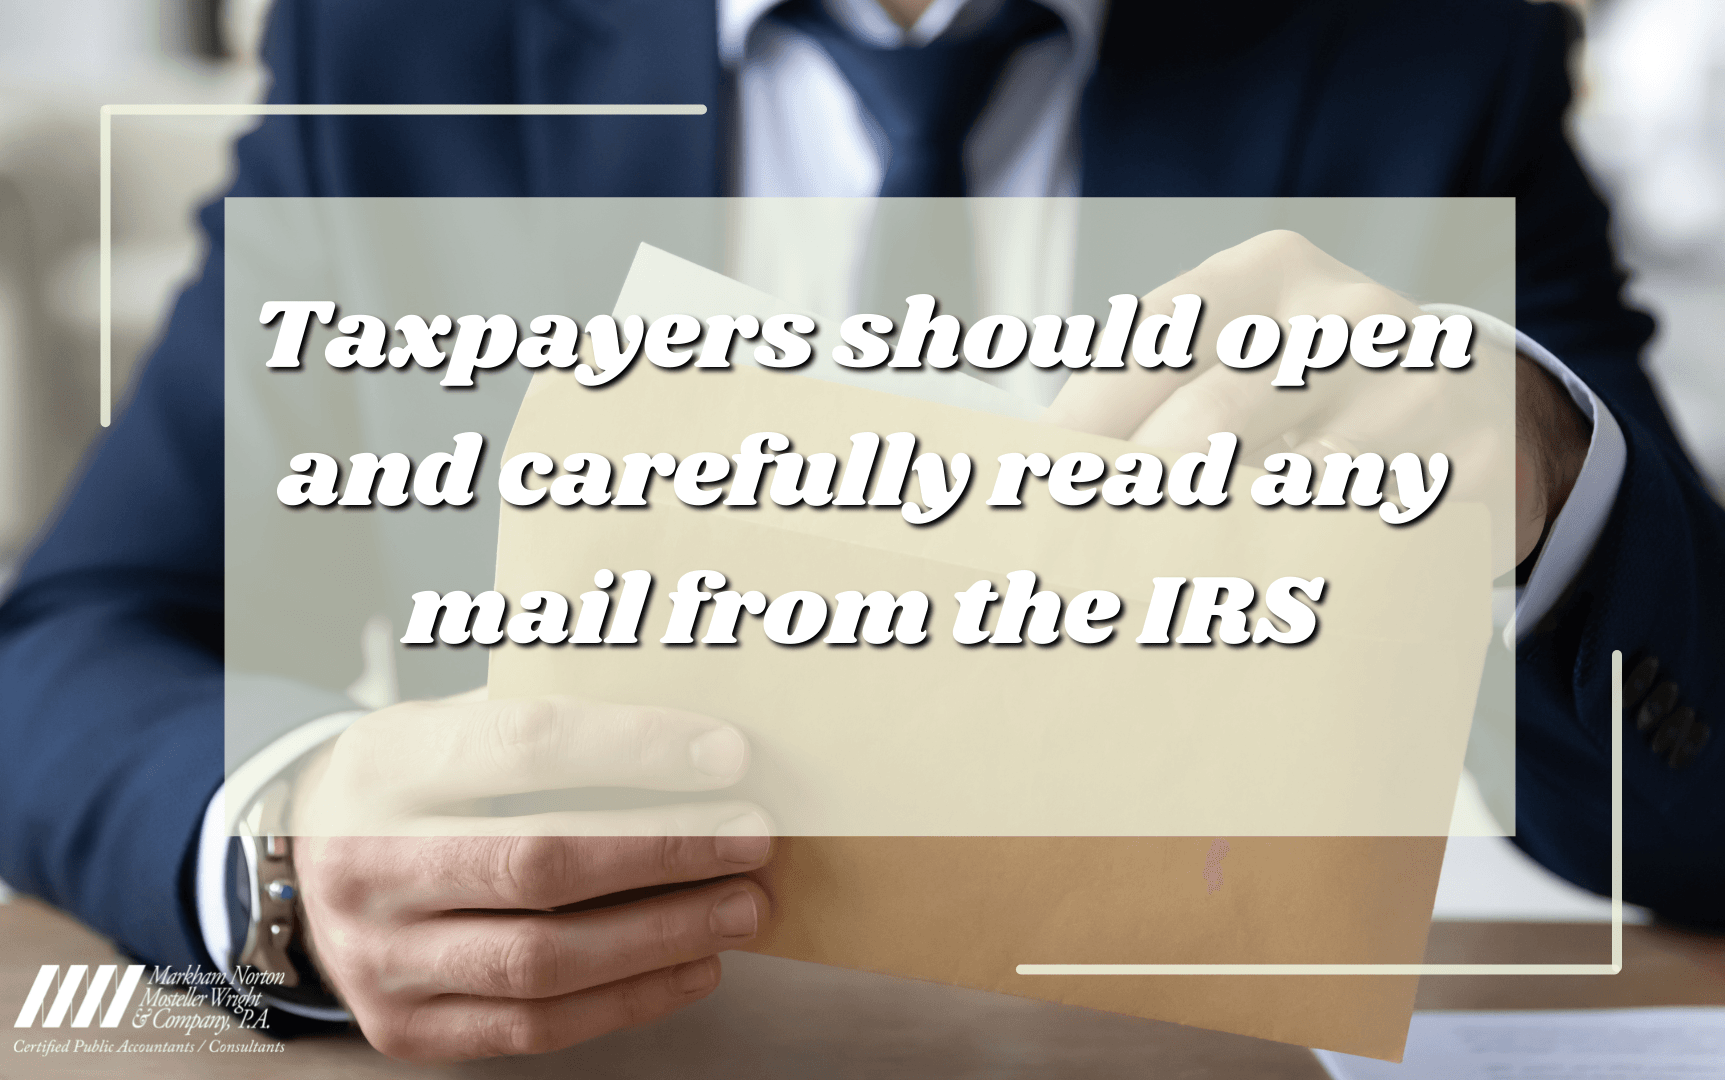 Taxpayers should open and carefully read any mail from the IRS